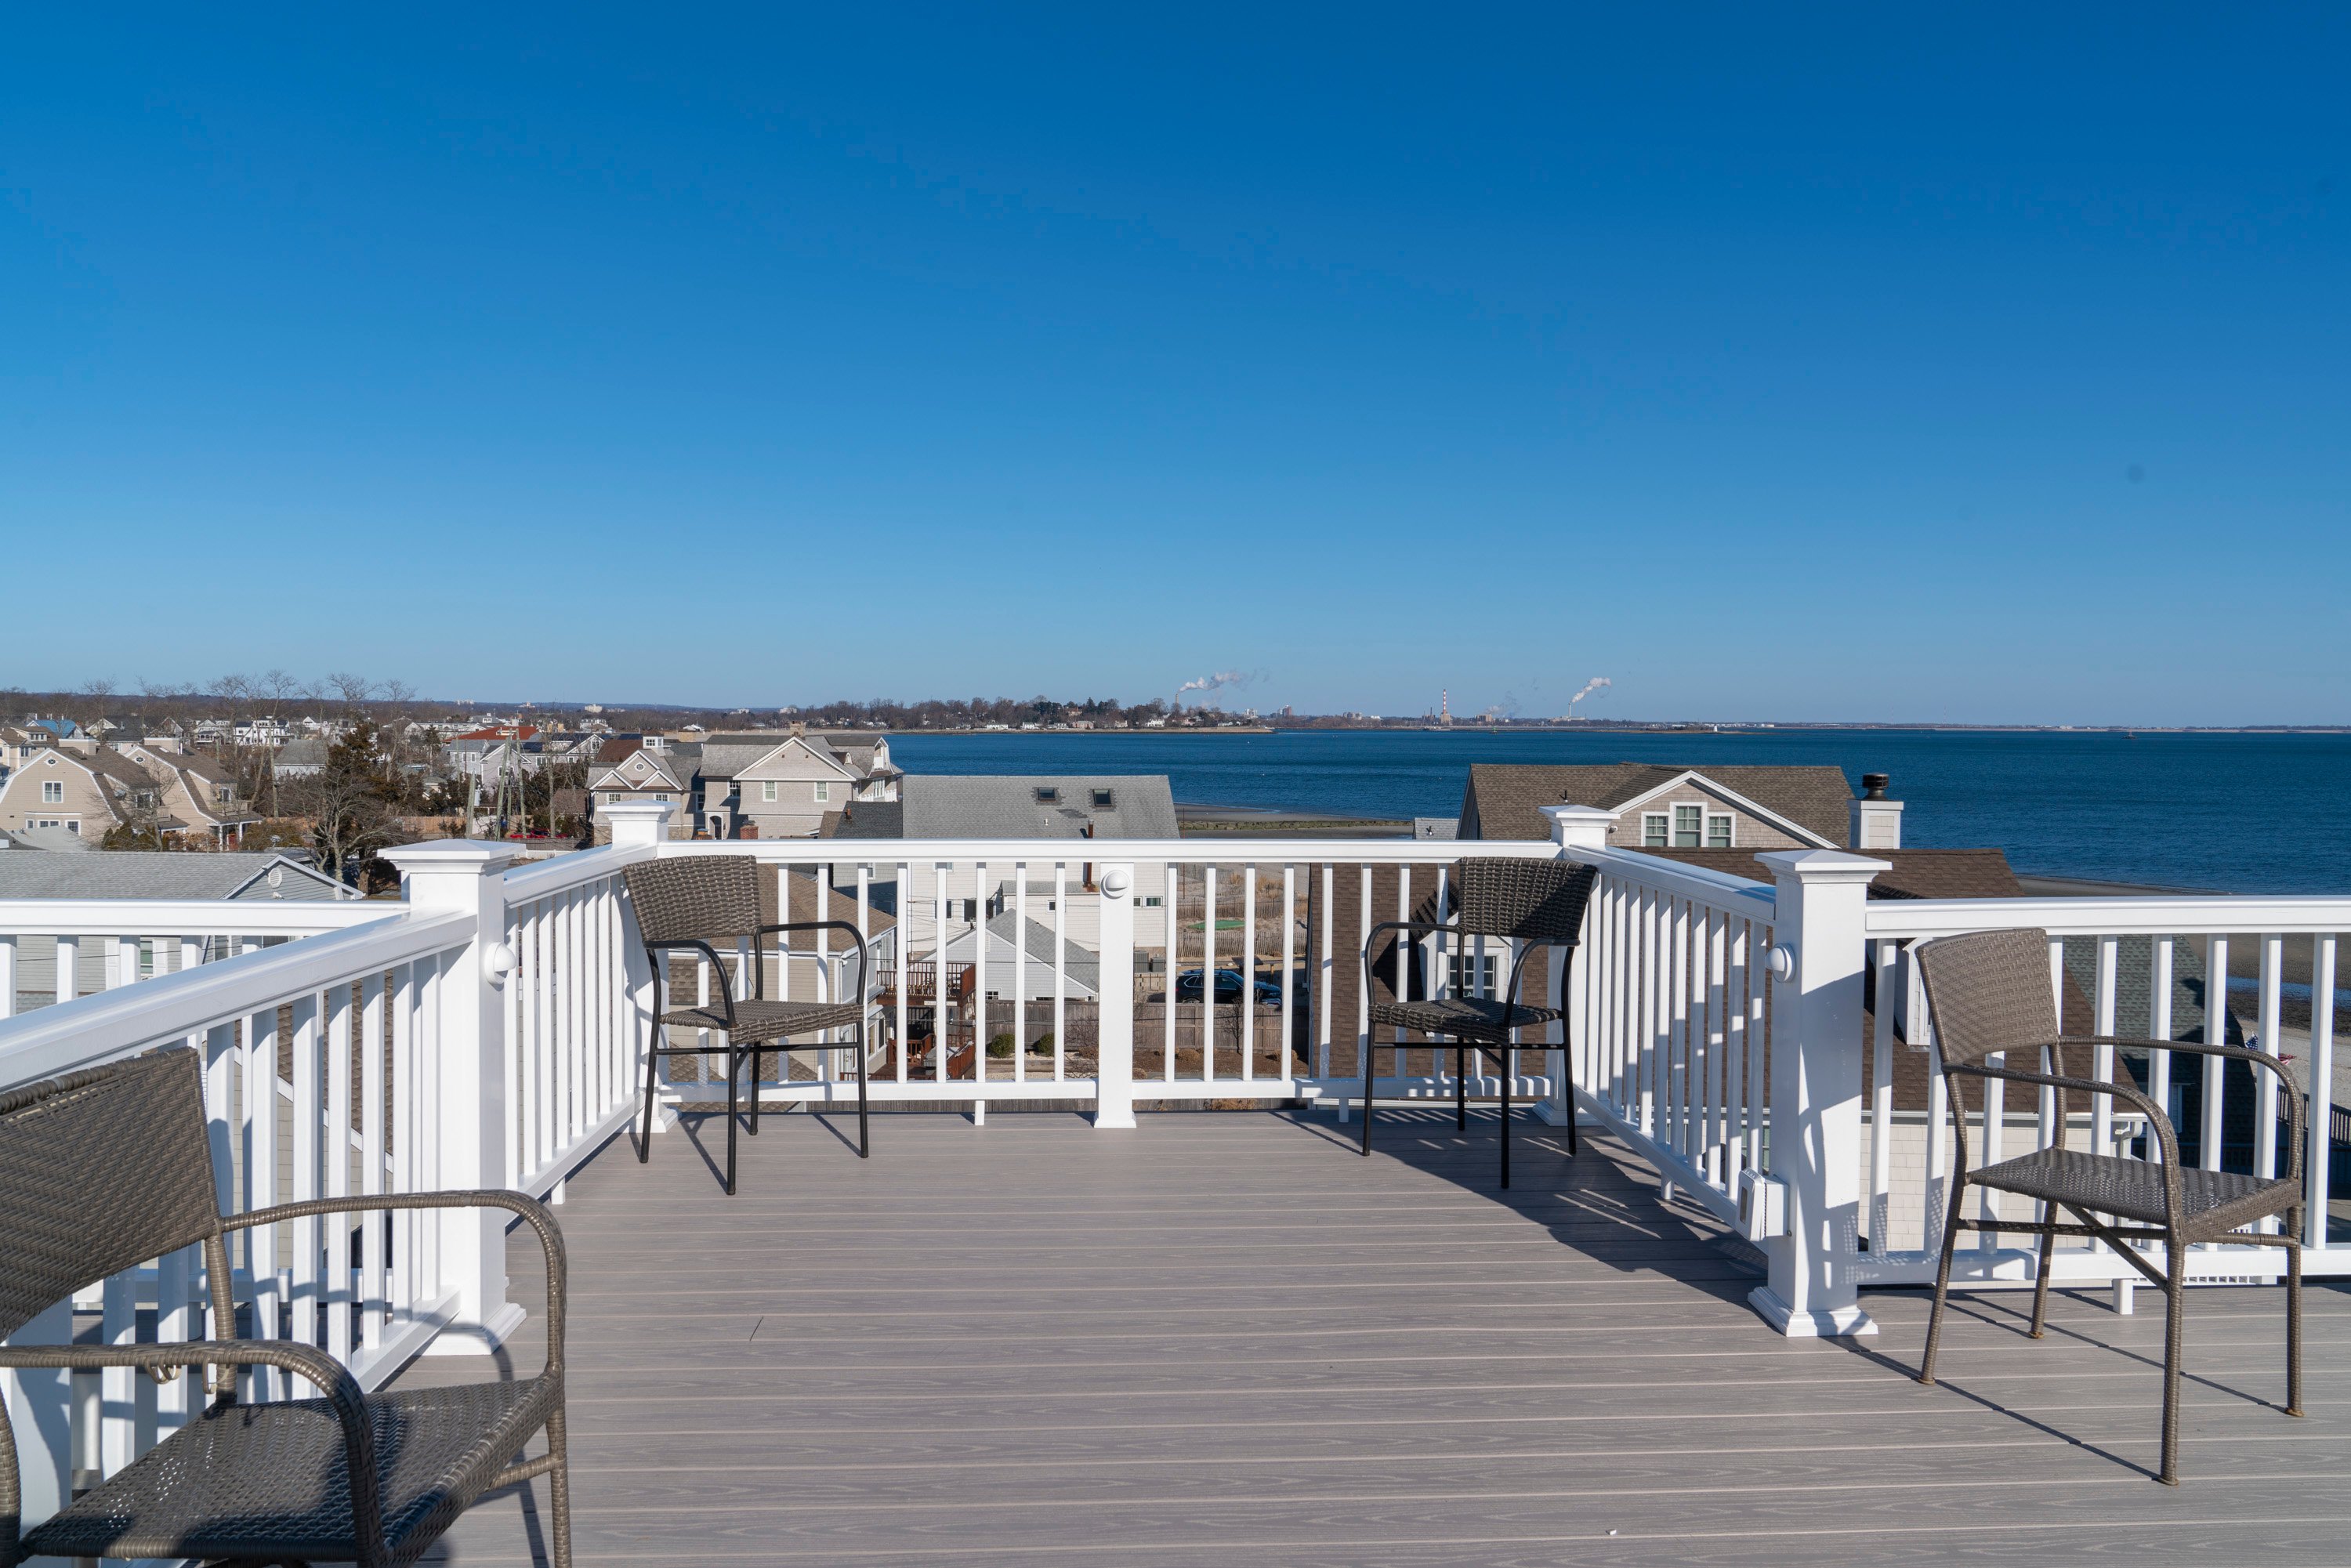 rooftop deck with chairs overlooking beach area